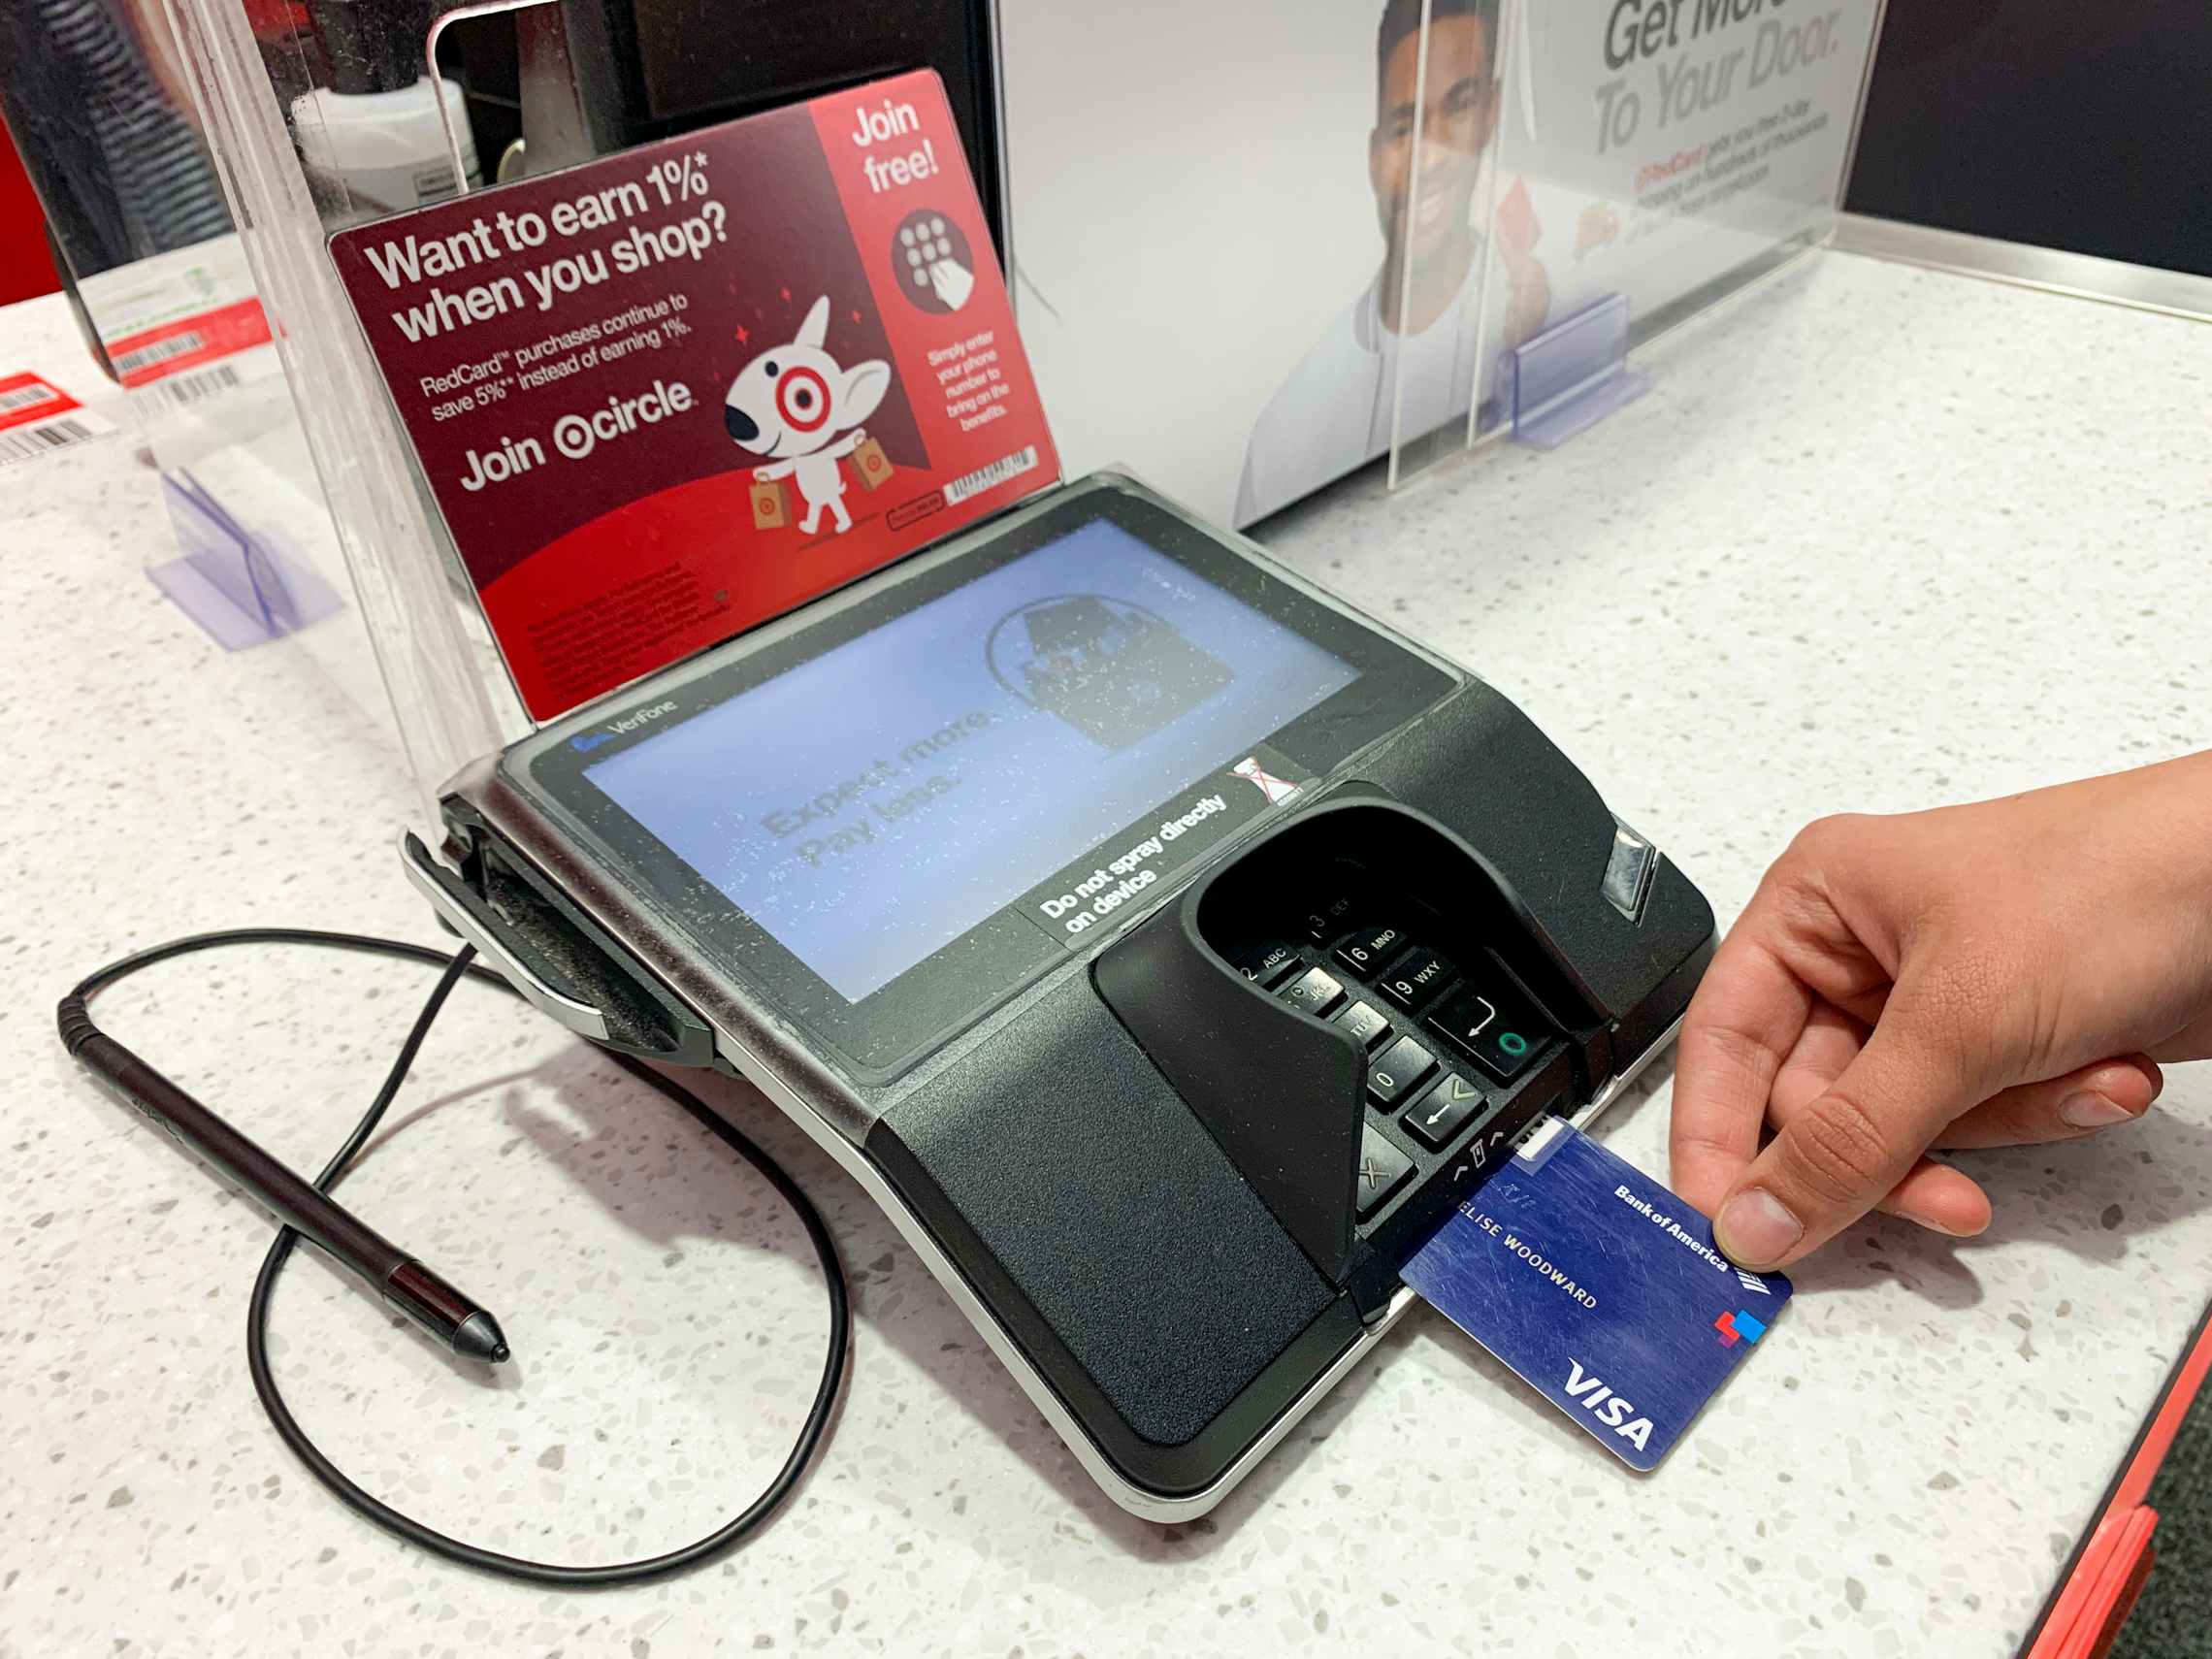 A person inserting their credit card at the credit card machine at a Target counter.